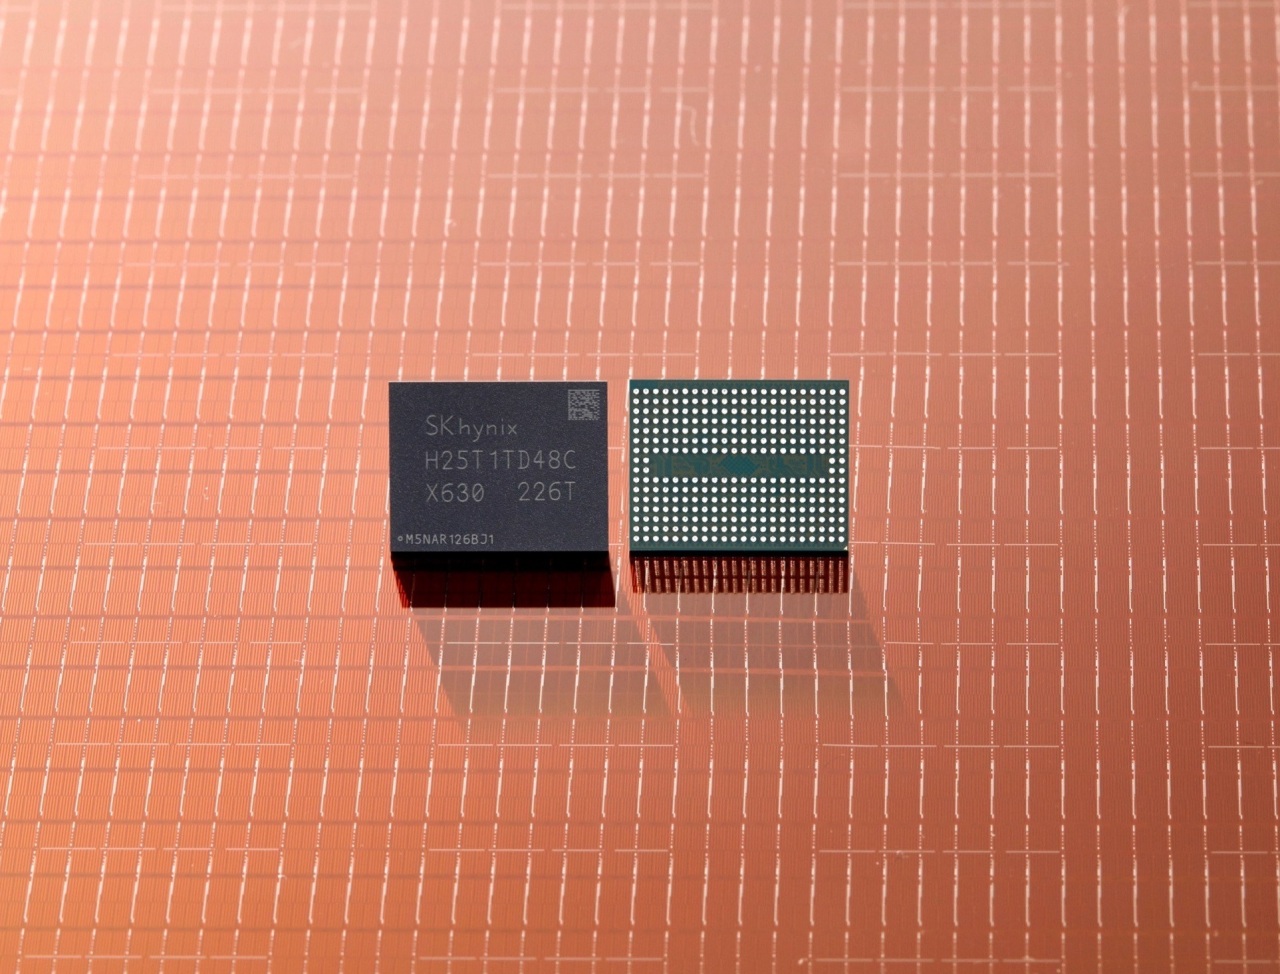 An image of SK hynix's 238-layer four-dimensional NAND flash memory (SK hynix)